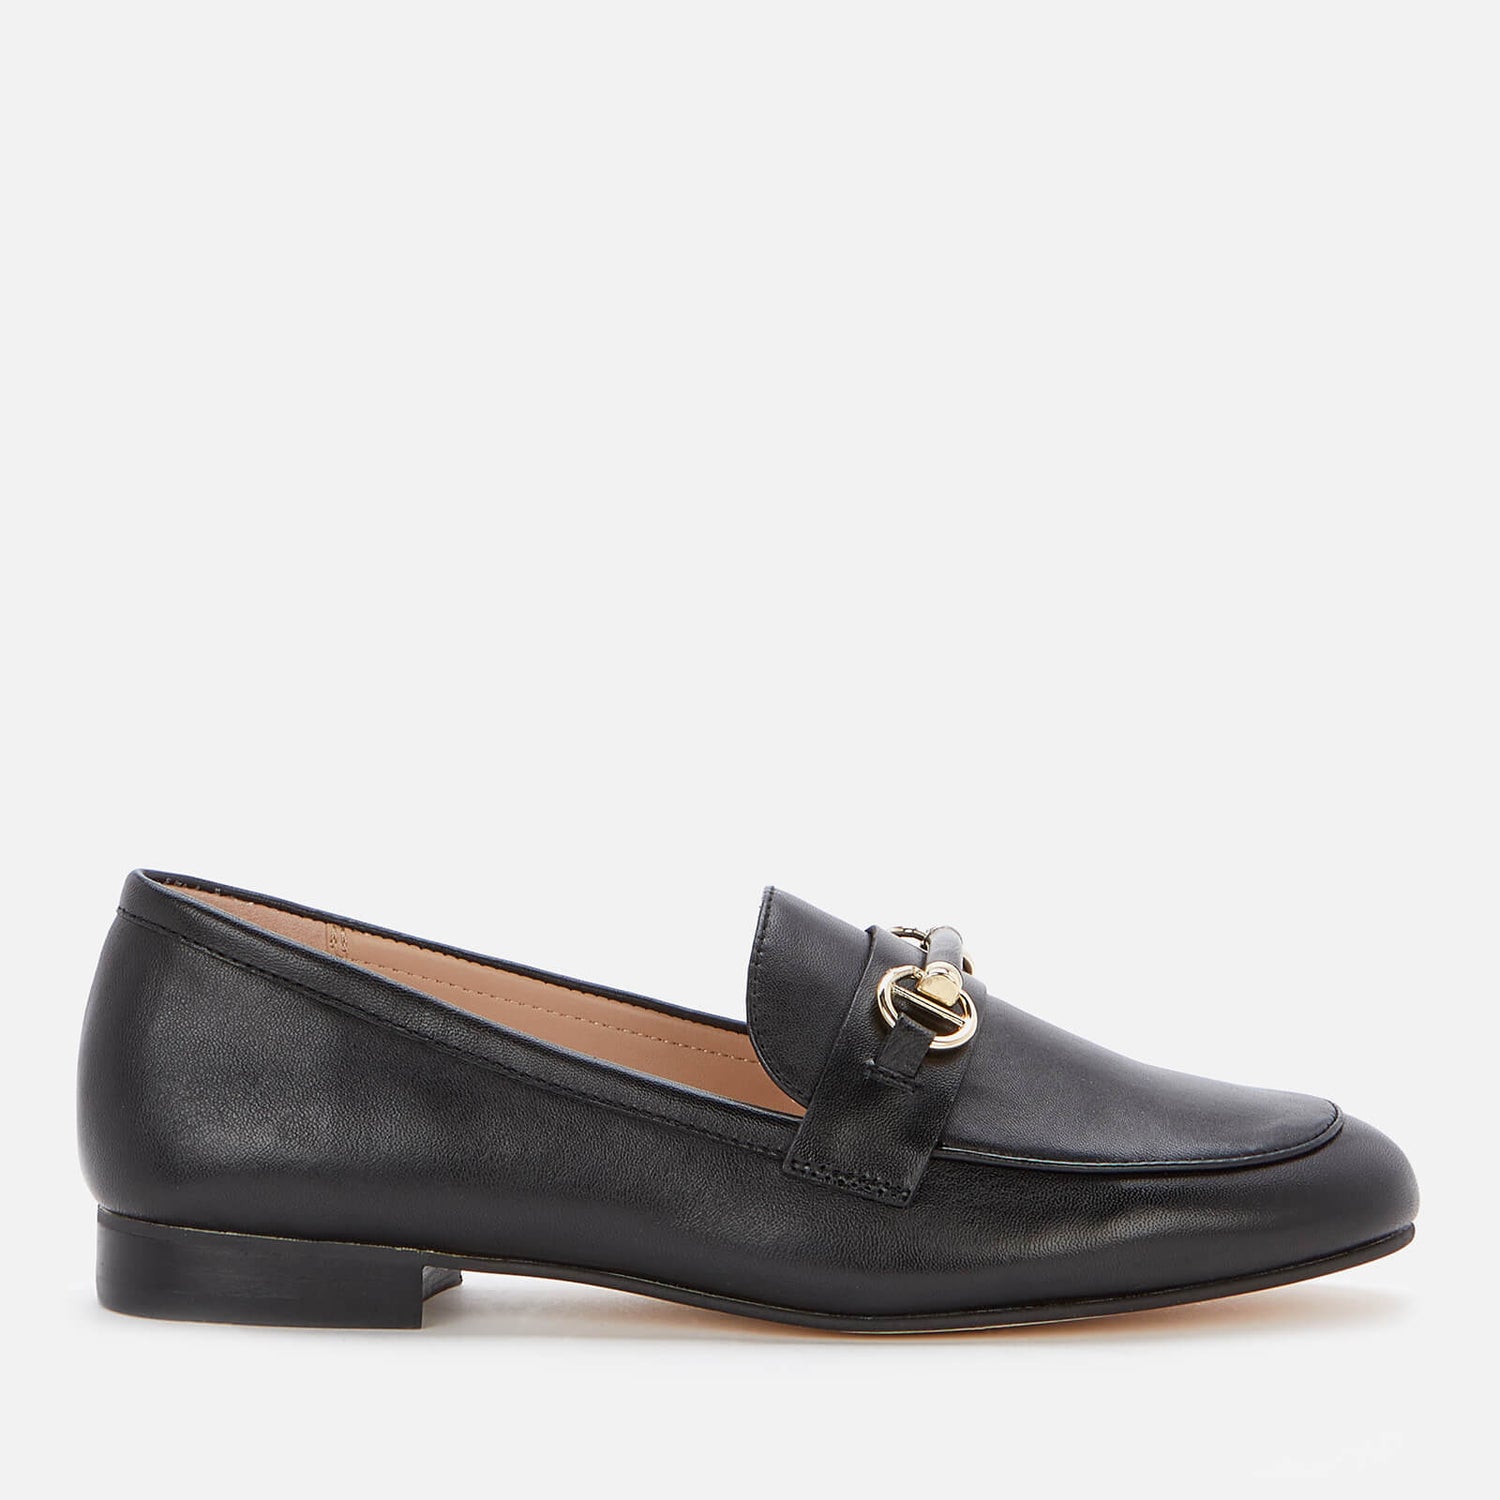 Dune Women's Grange Leather Loafers - Black | FREE UK Delivery | Allsole